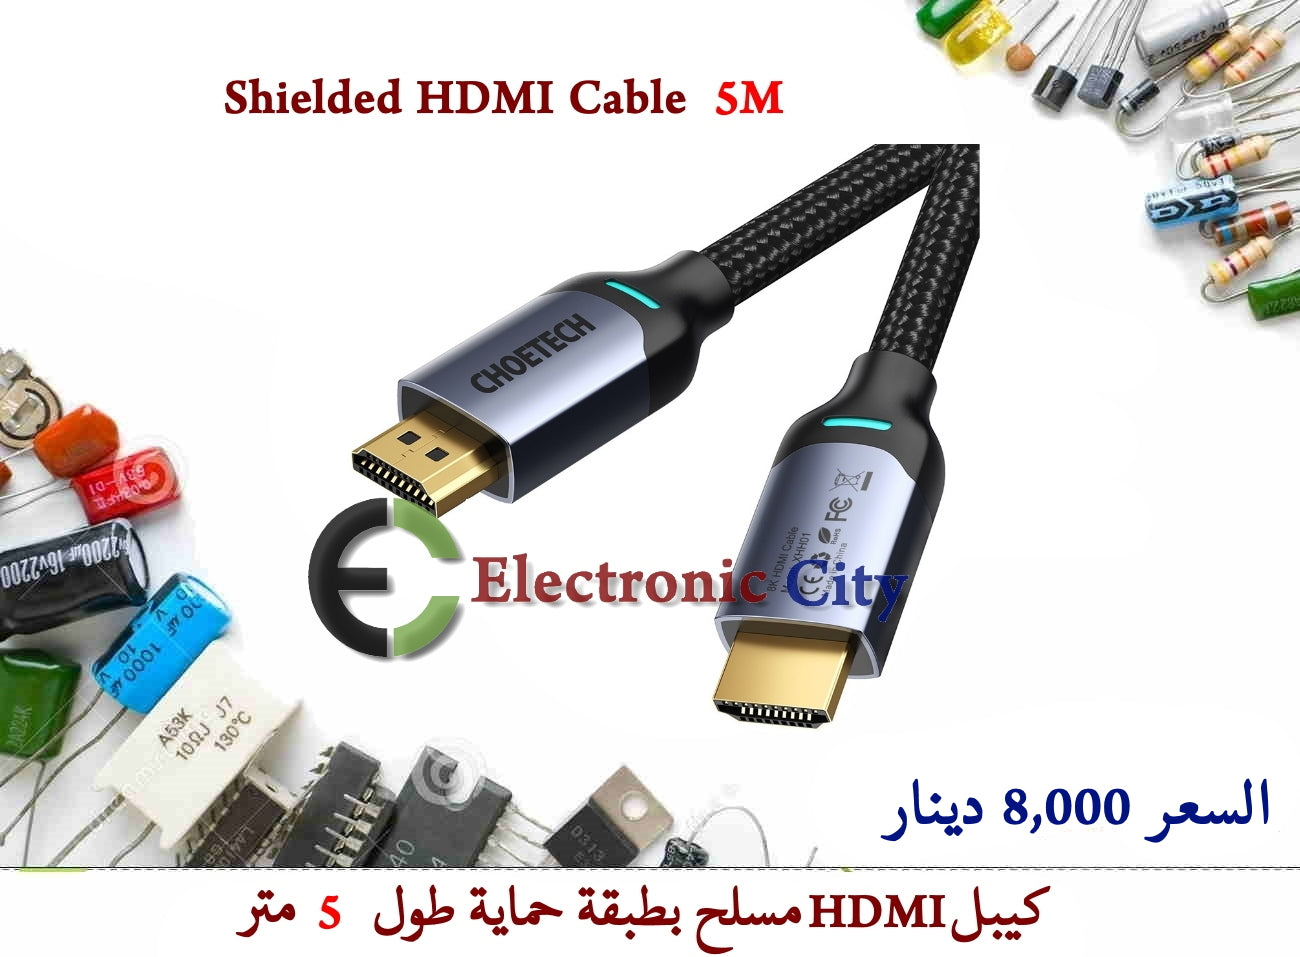 Shielded HDMI Cable 5M